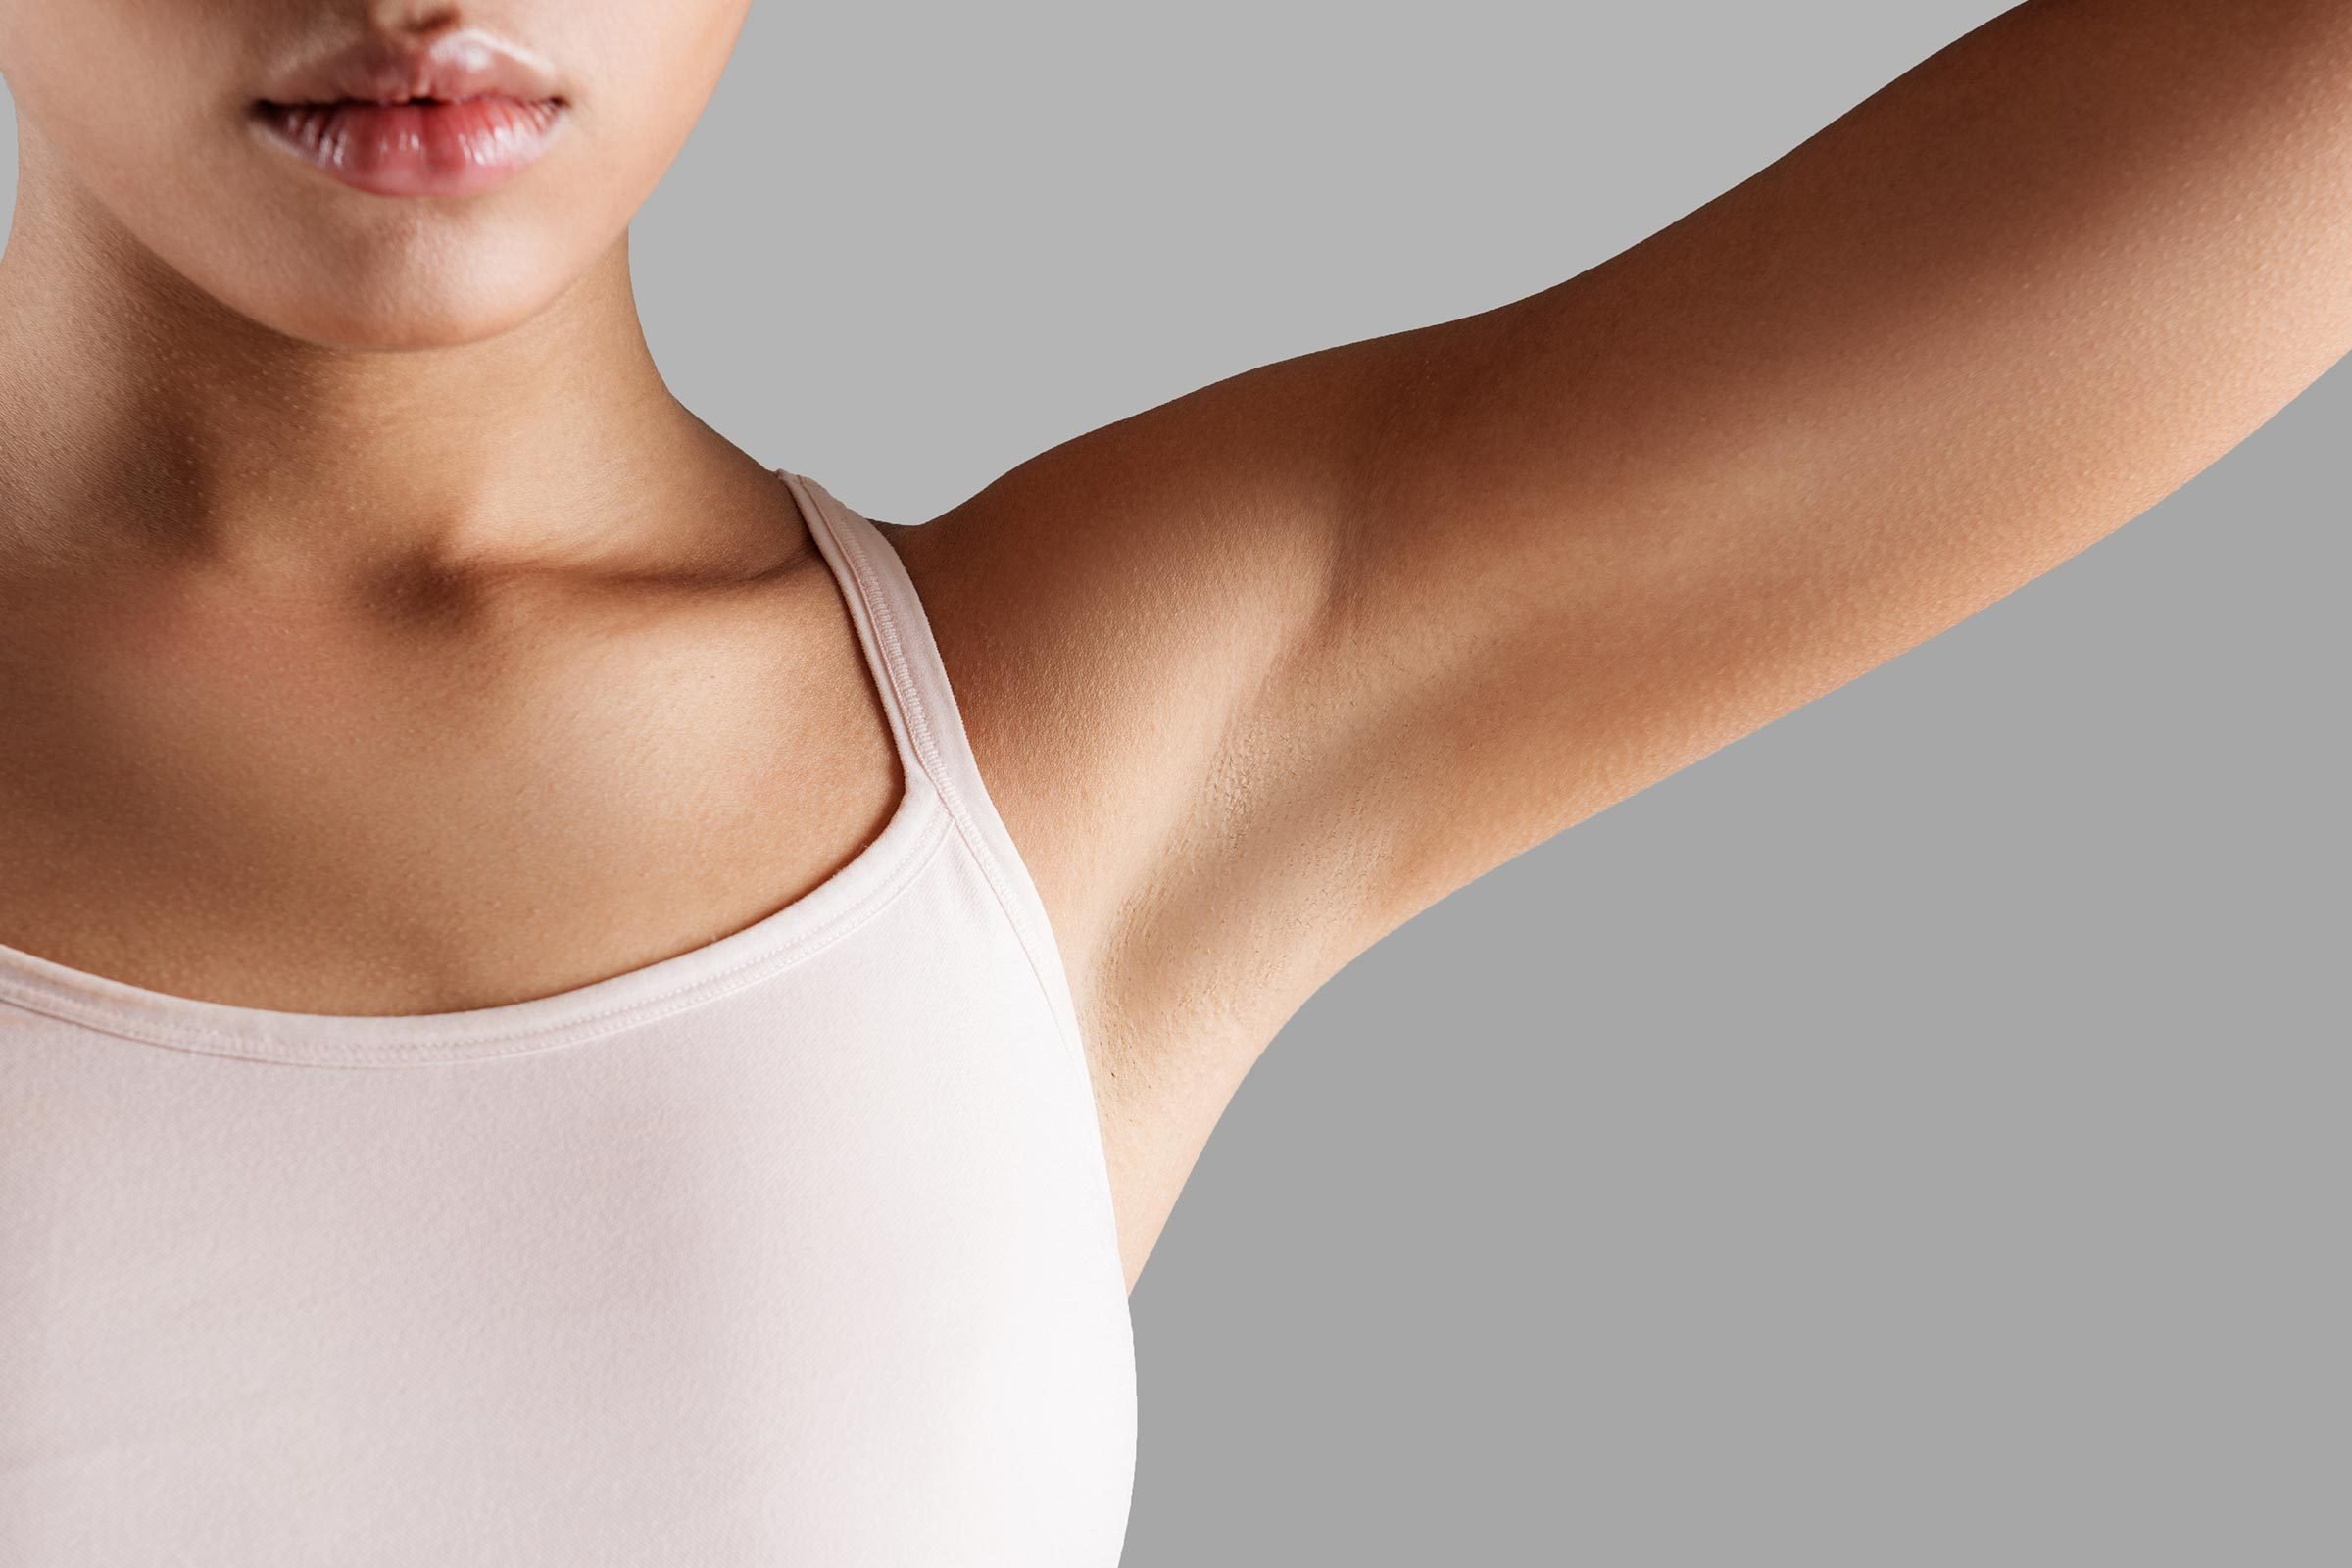 If You Have a Lump in Your Armpit, Here’s What It Could Mean